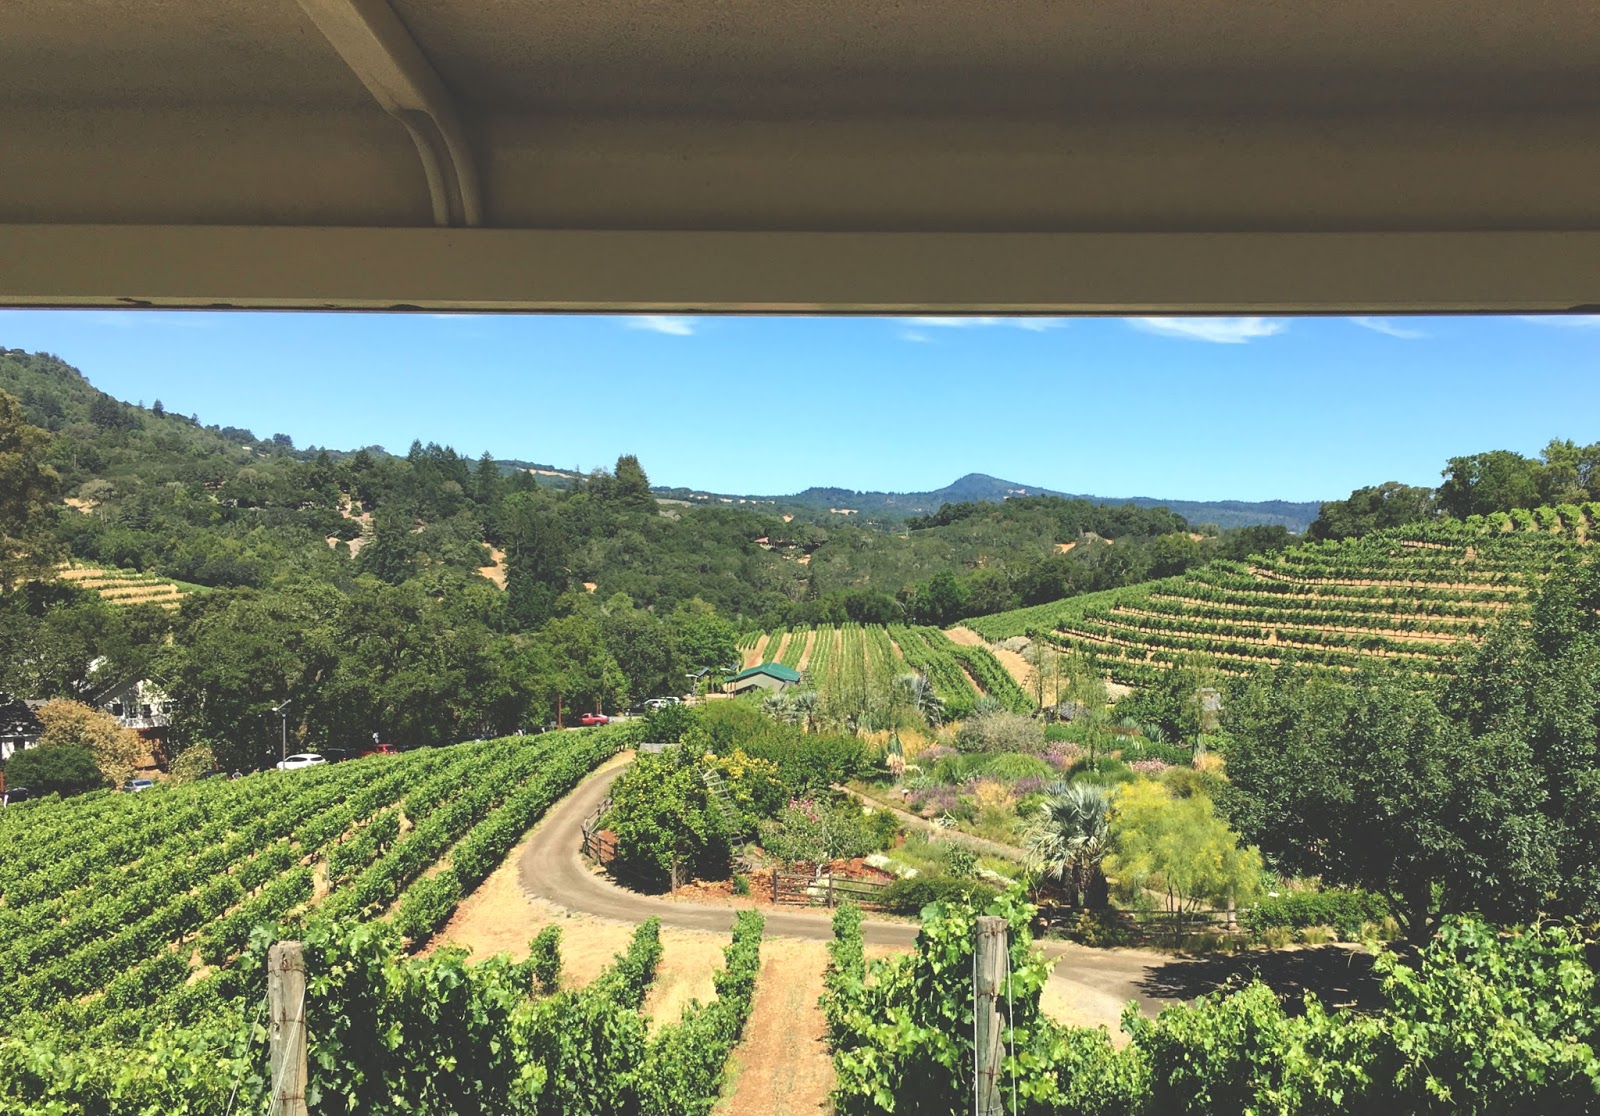 Benziger - a winery in Sonoma, California